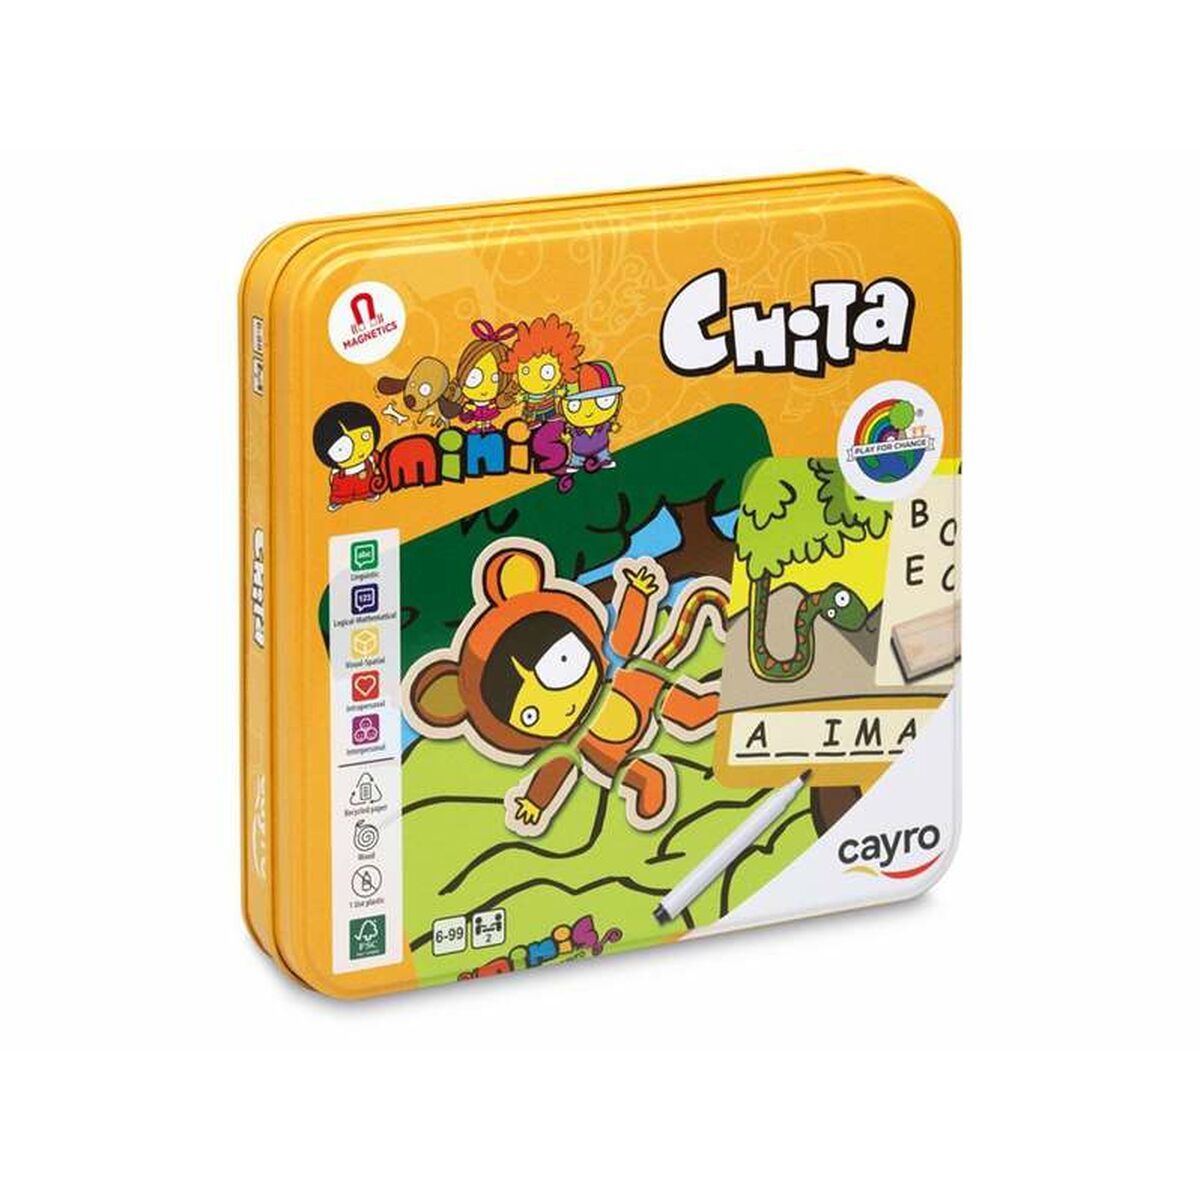 Educational Baby Game Cayro Chita 8 Pieces - Little Baby Shop